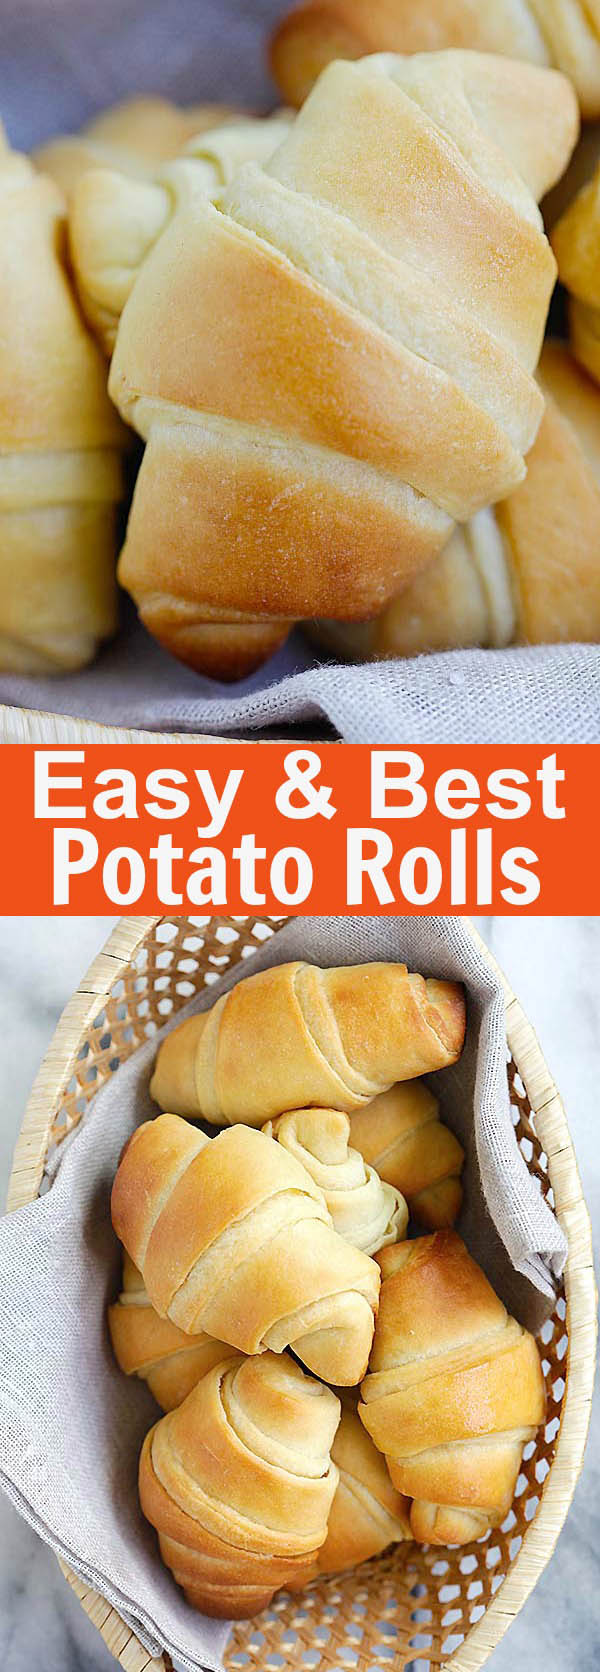 Easy Potato Rolls – the best, softest, pillowy homemade potato rolls recipe ever! From Oh Sweet Basil’s cookbook. Fail proof and SO GOOD | rasamalaysia.com